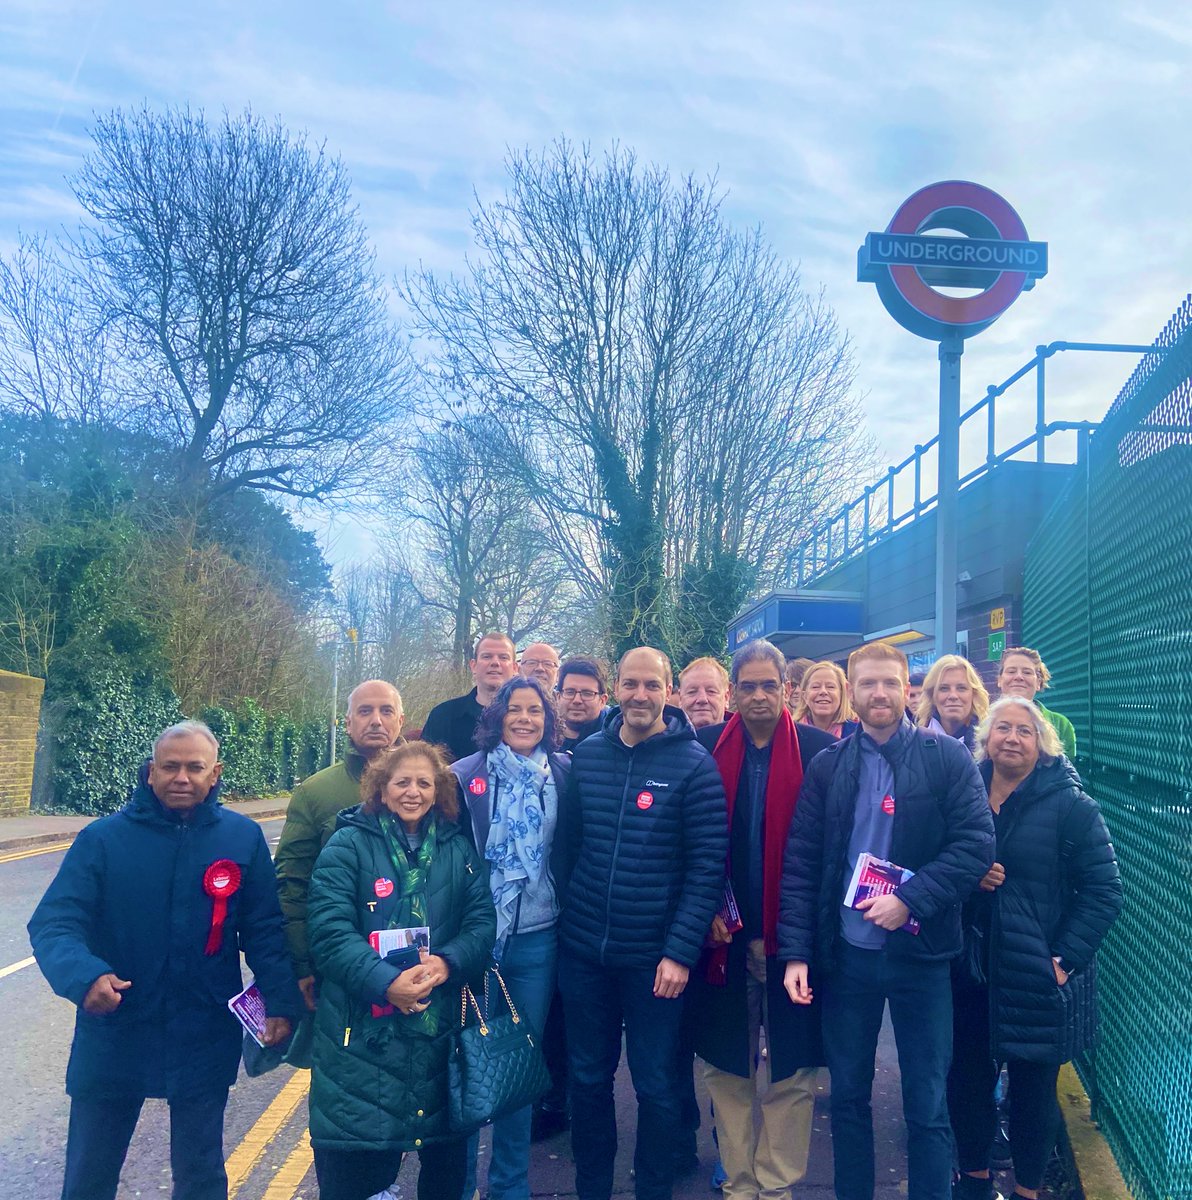 Busy morning in Uxbridge & South Ruislip speaking to residents - people on the doors today absolutely fed up with the state of local services, roads and spiralling cost of living. Lots saying they want a #GeneralElectionlNow 🌹